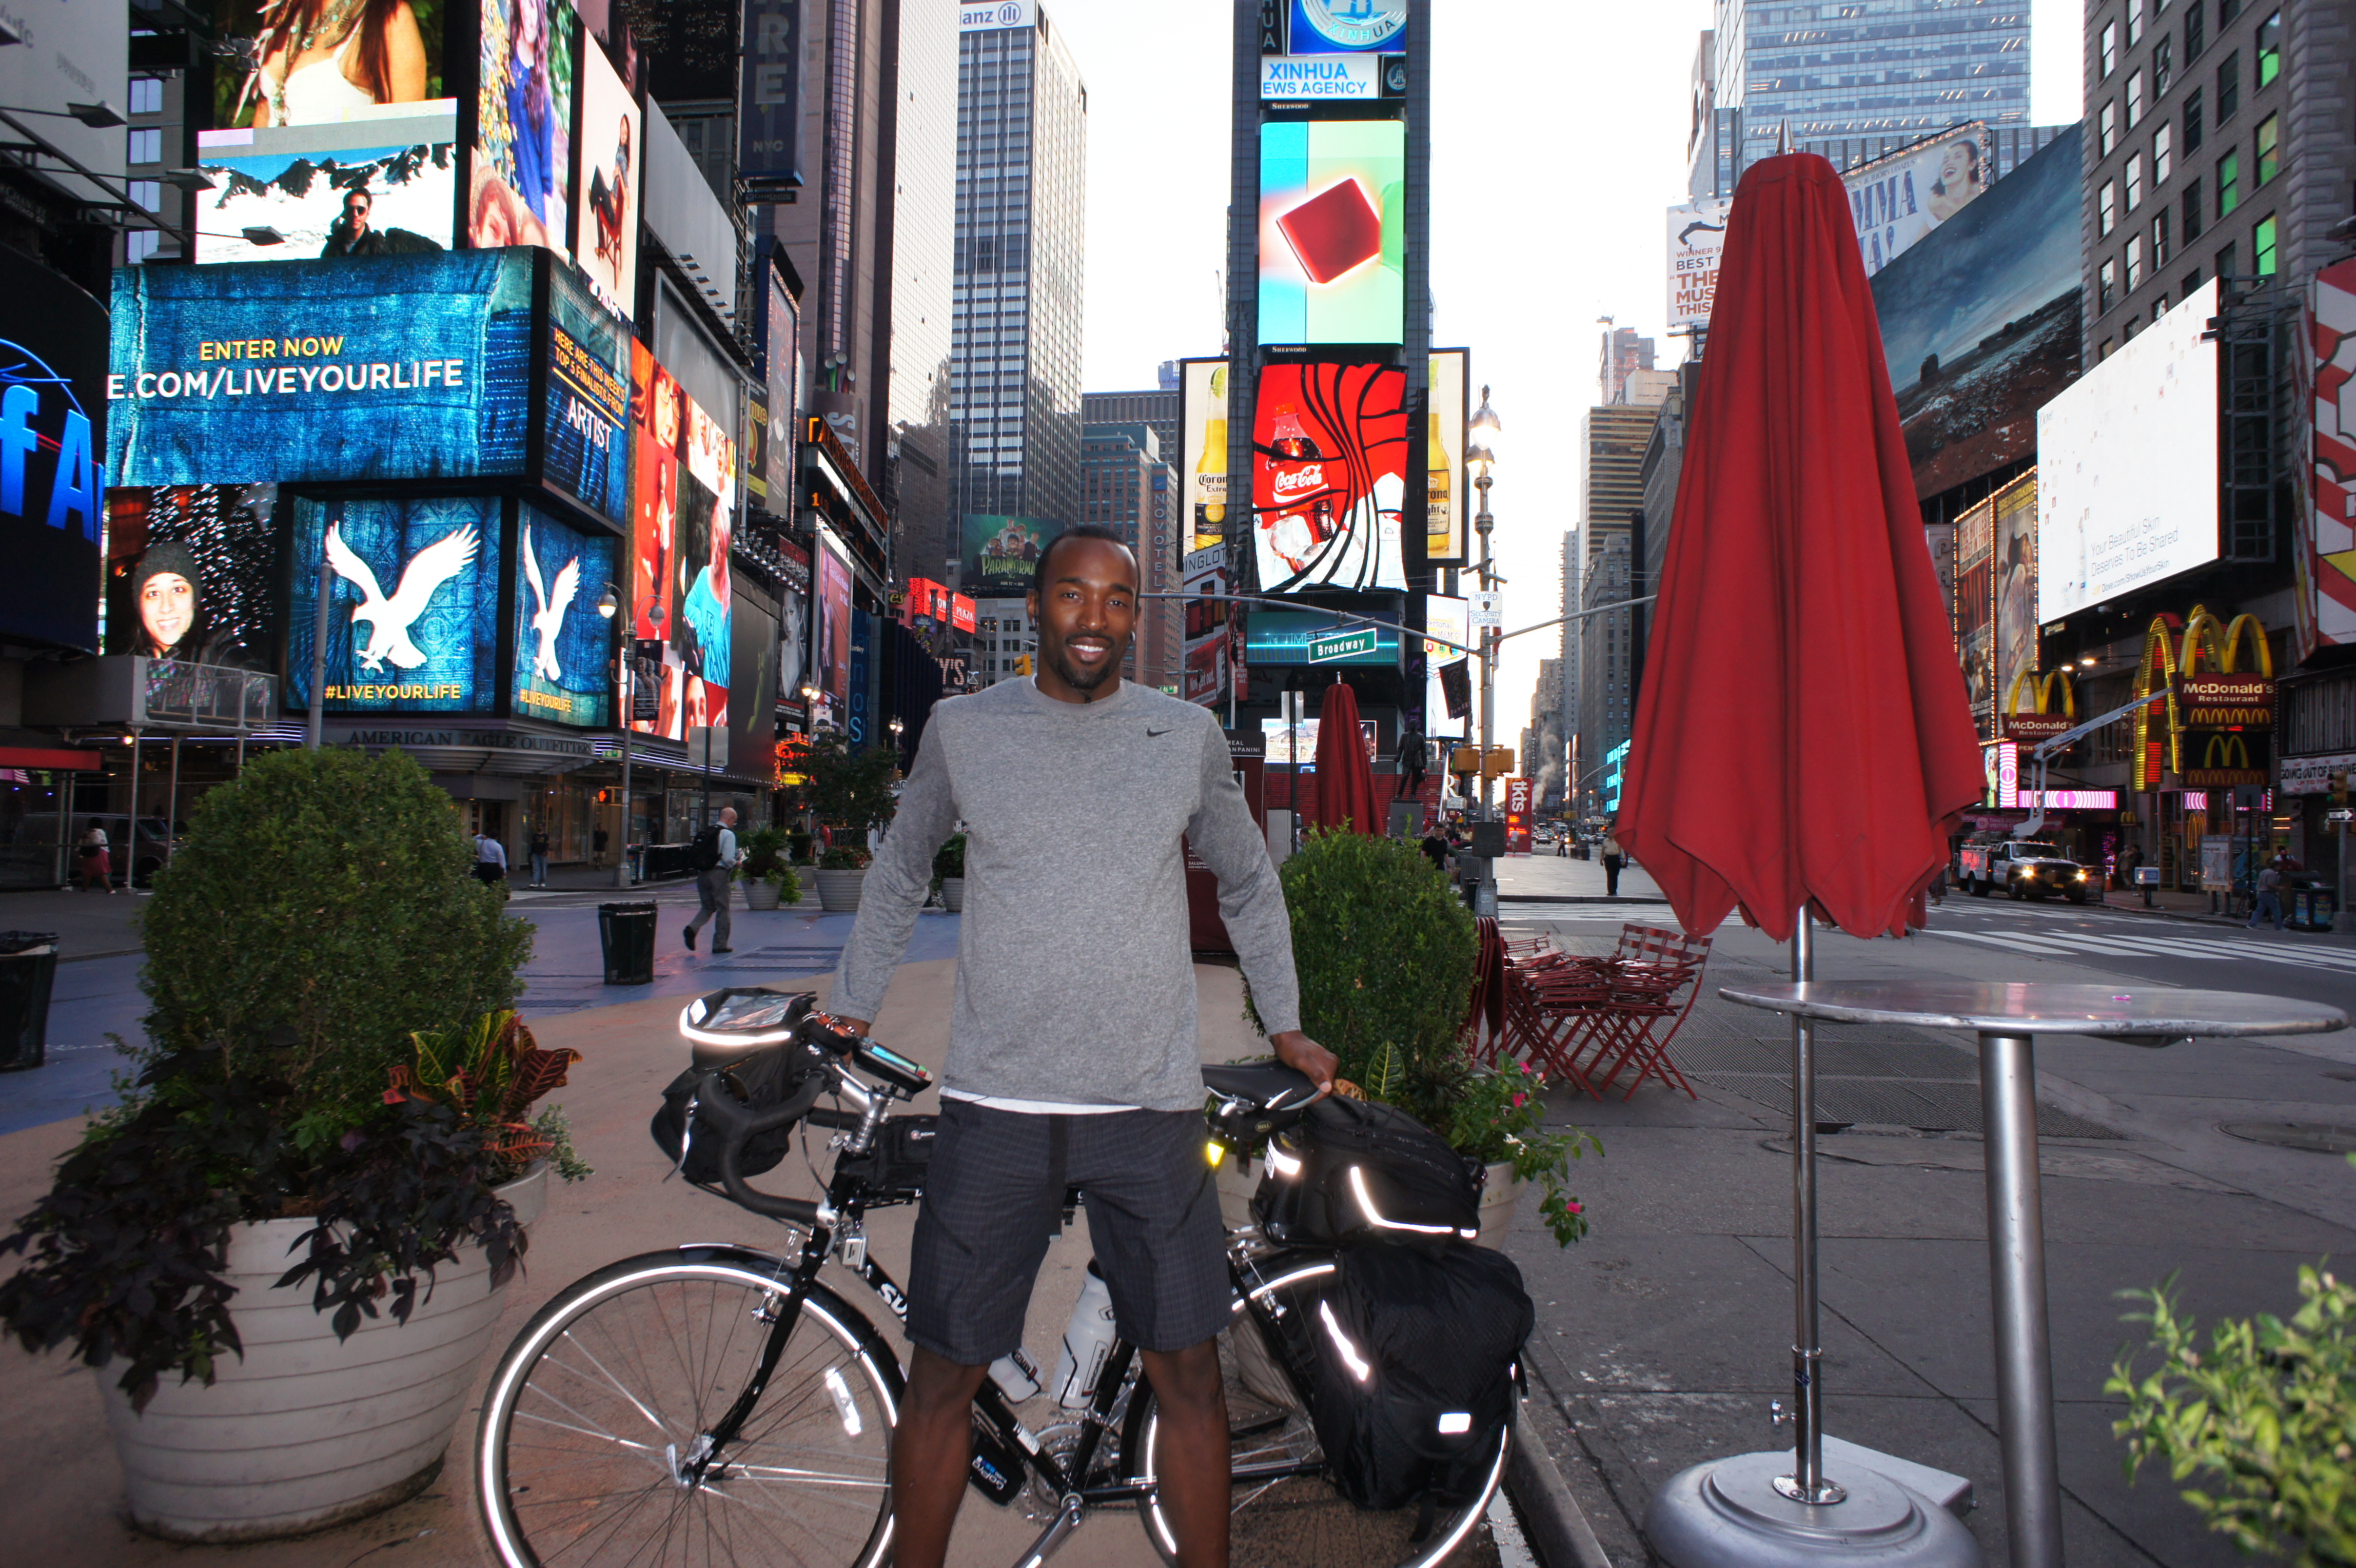 Justin McClelland starting the iHeartCardio ride in Times Square NYC